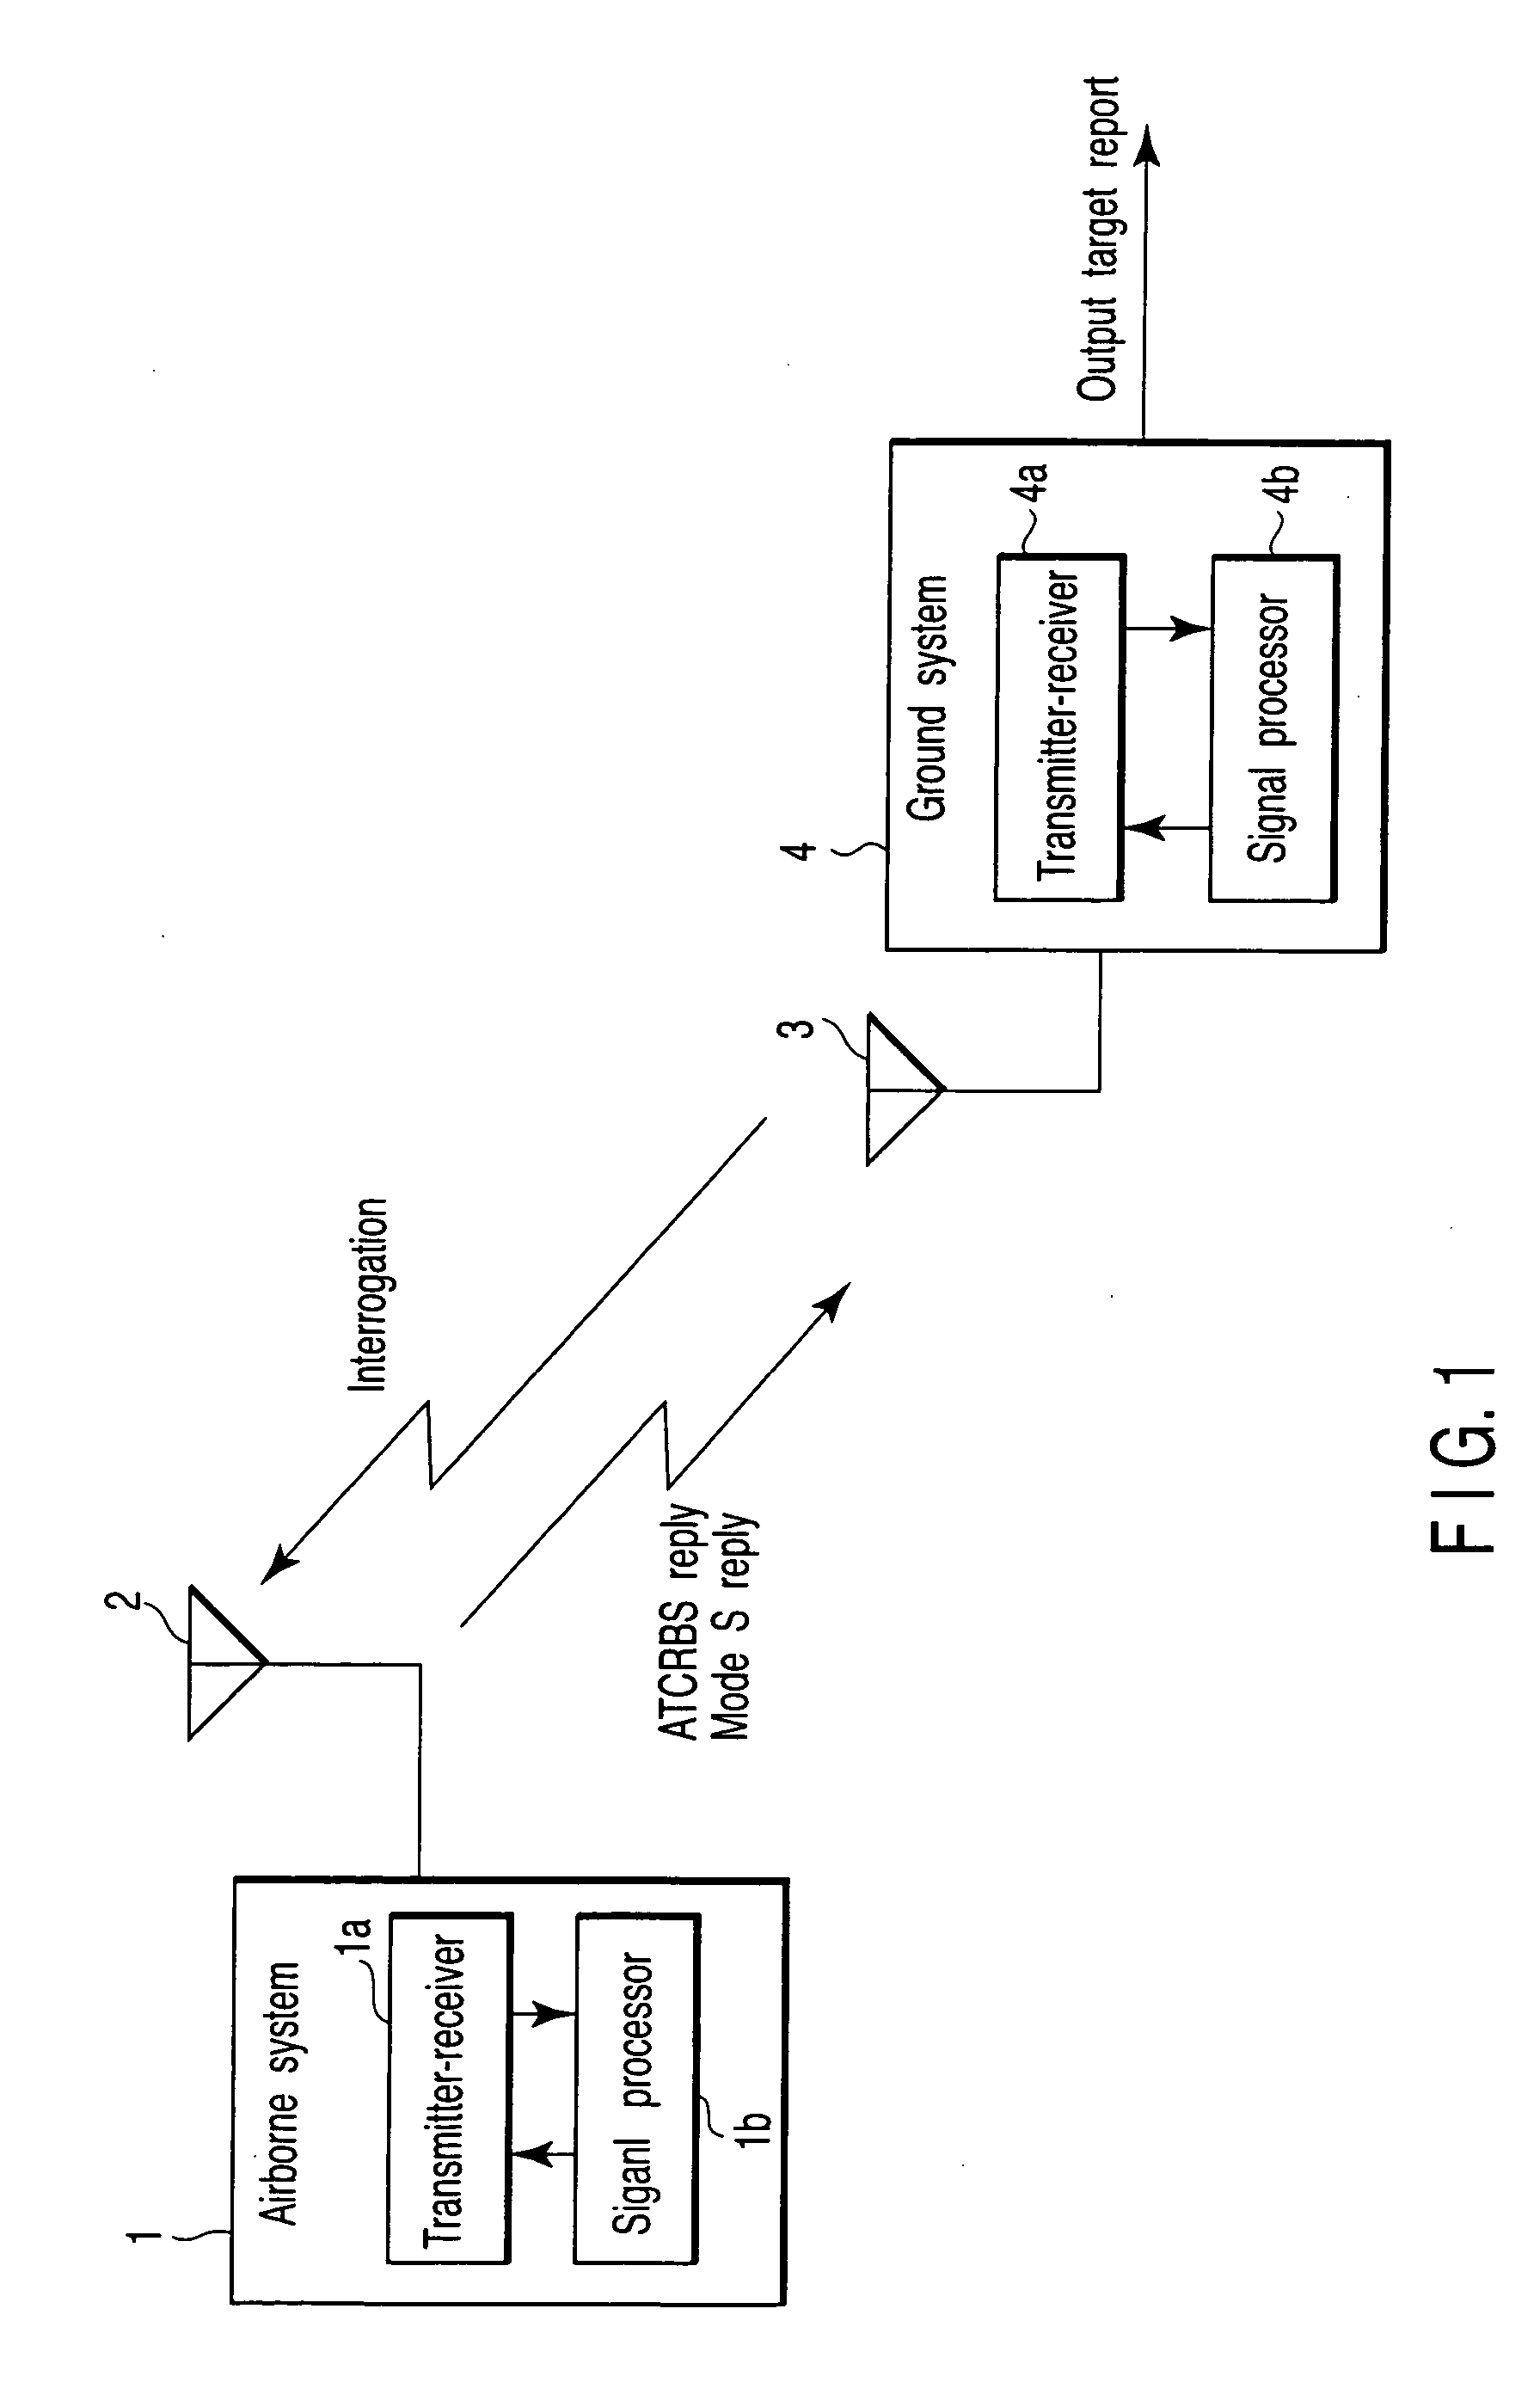 Secondary surveillance radar system, and ground system for use therein